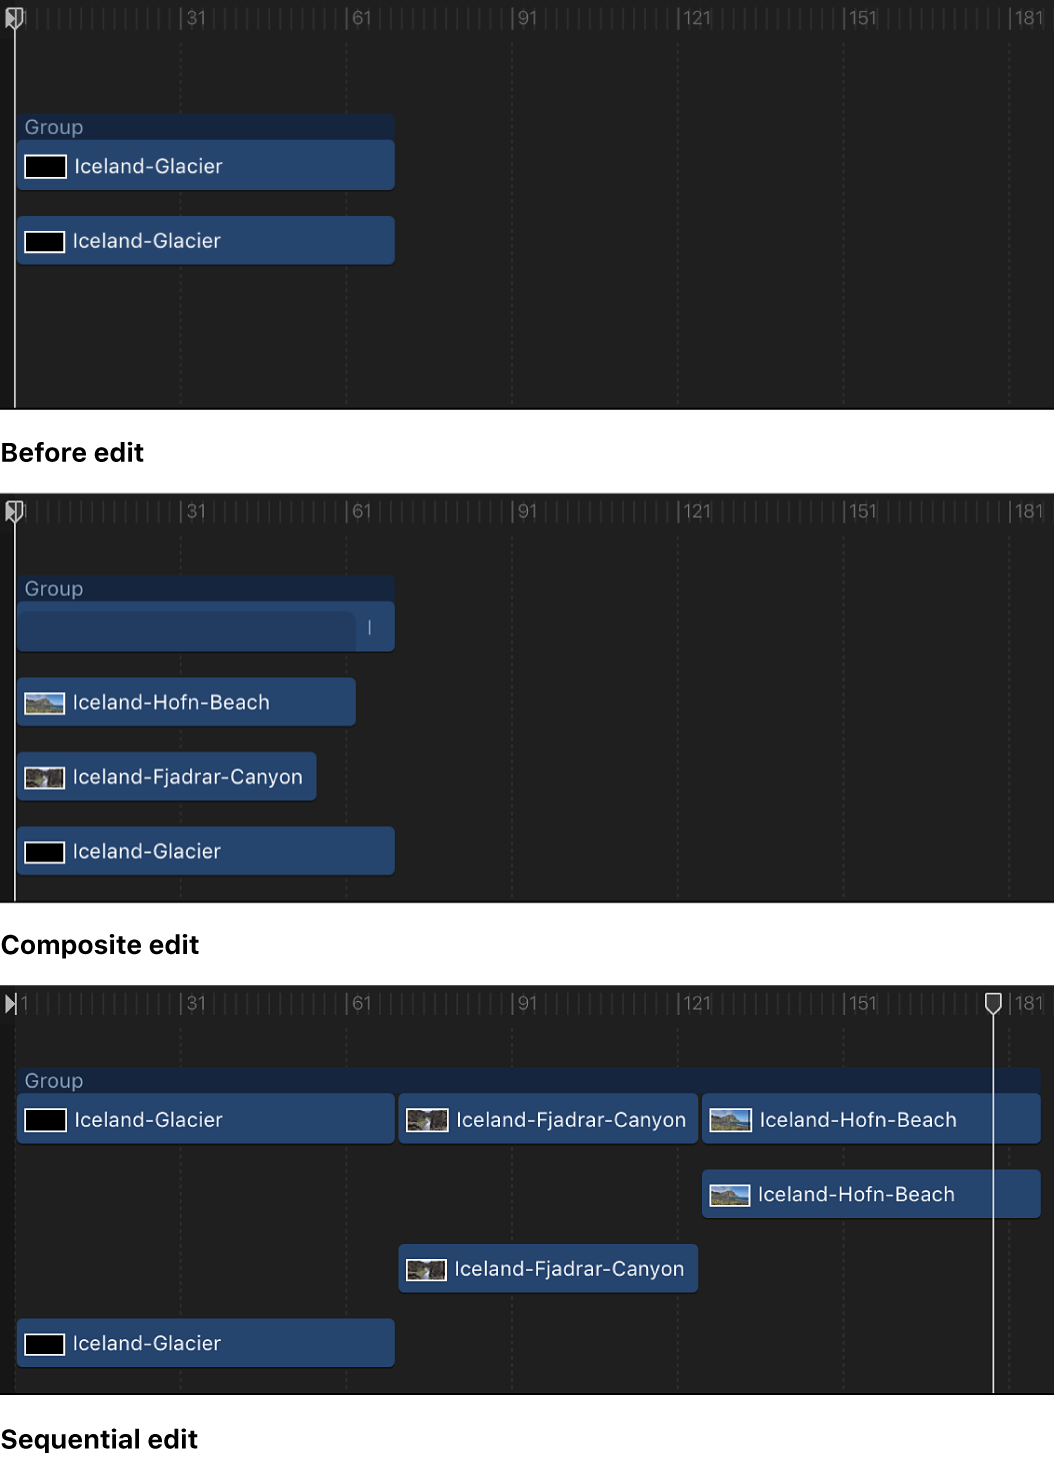 Timeline showing original clip in Timeline, clips added to a sequence as a composite, and sequentially